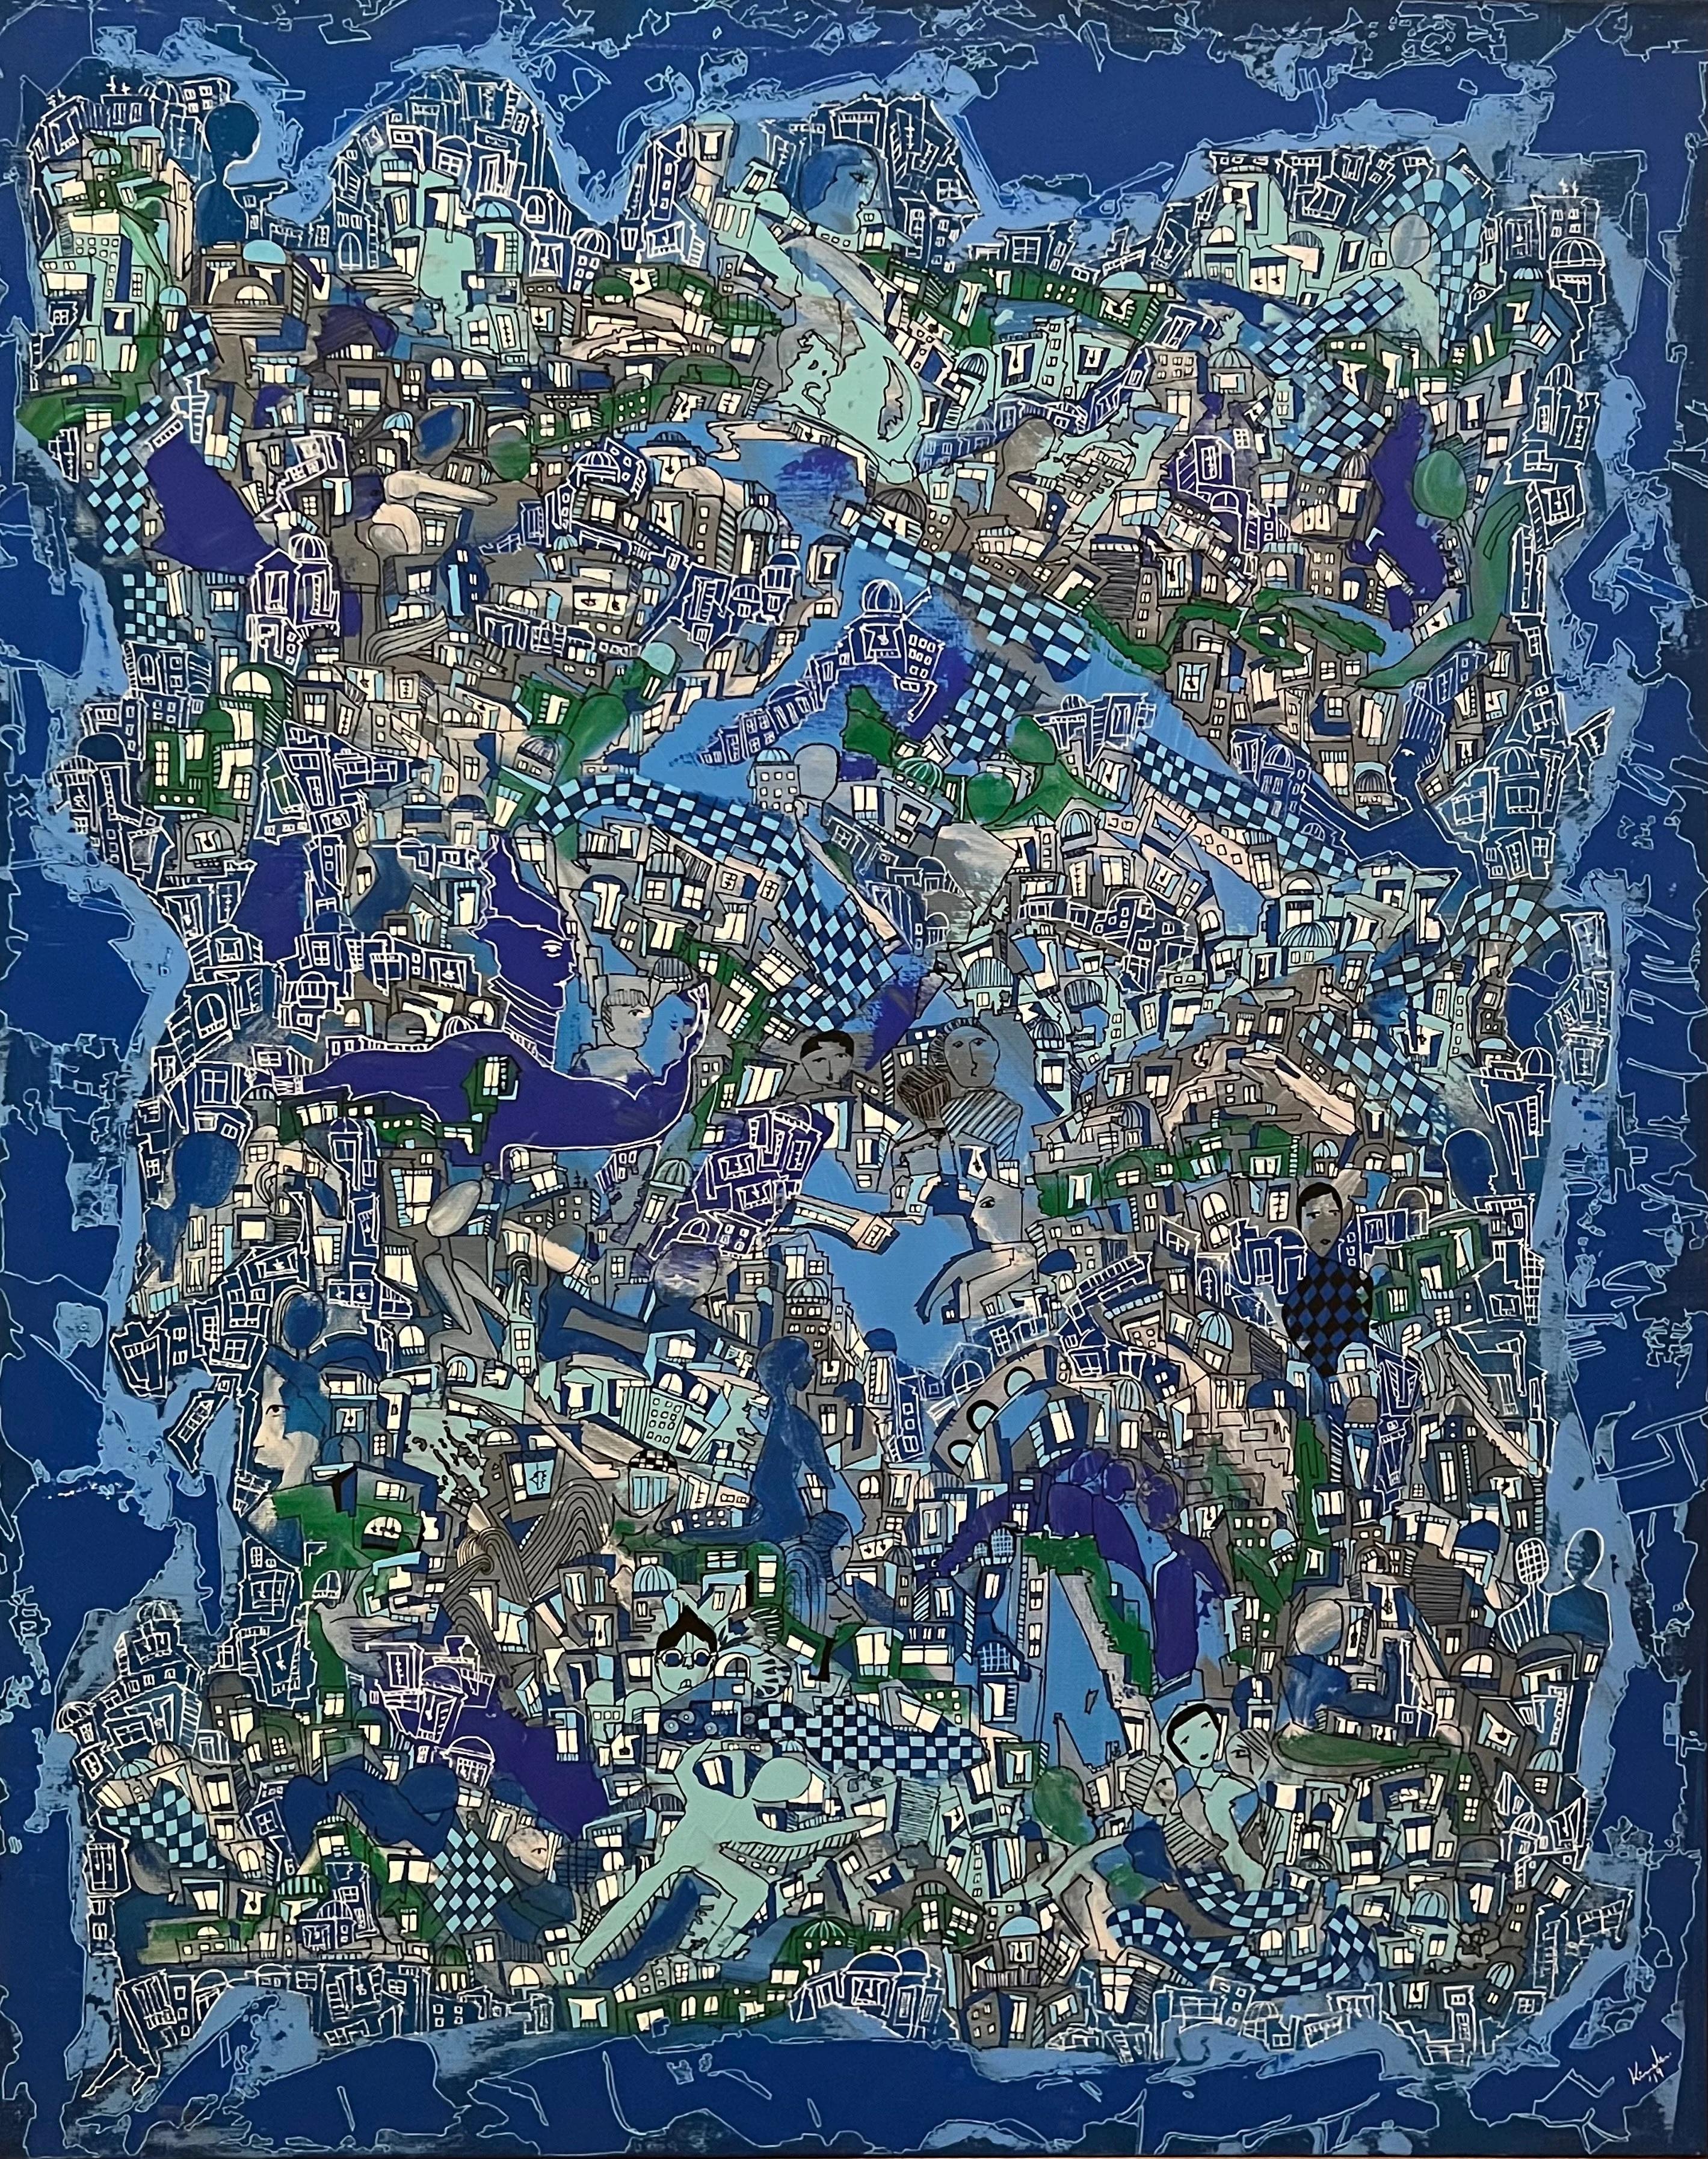 "Blue Fever" Acrylic & Inks Painting 39" x 32" inch by Kinda Adly